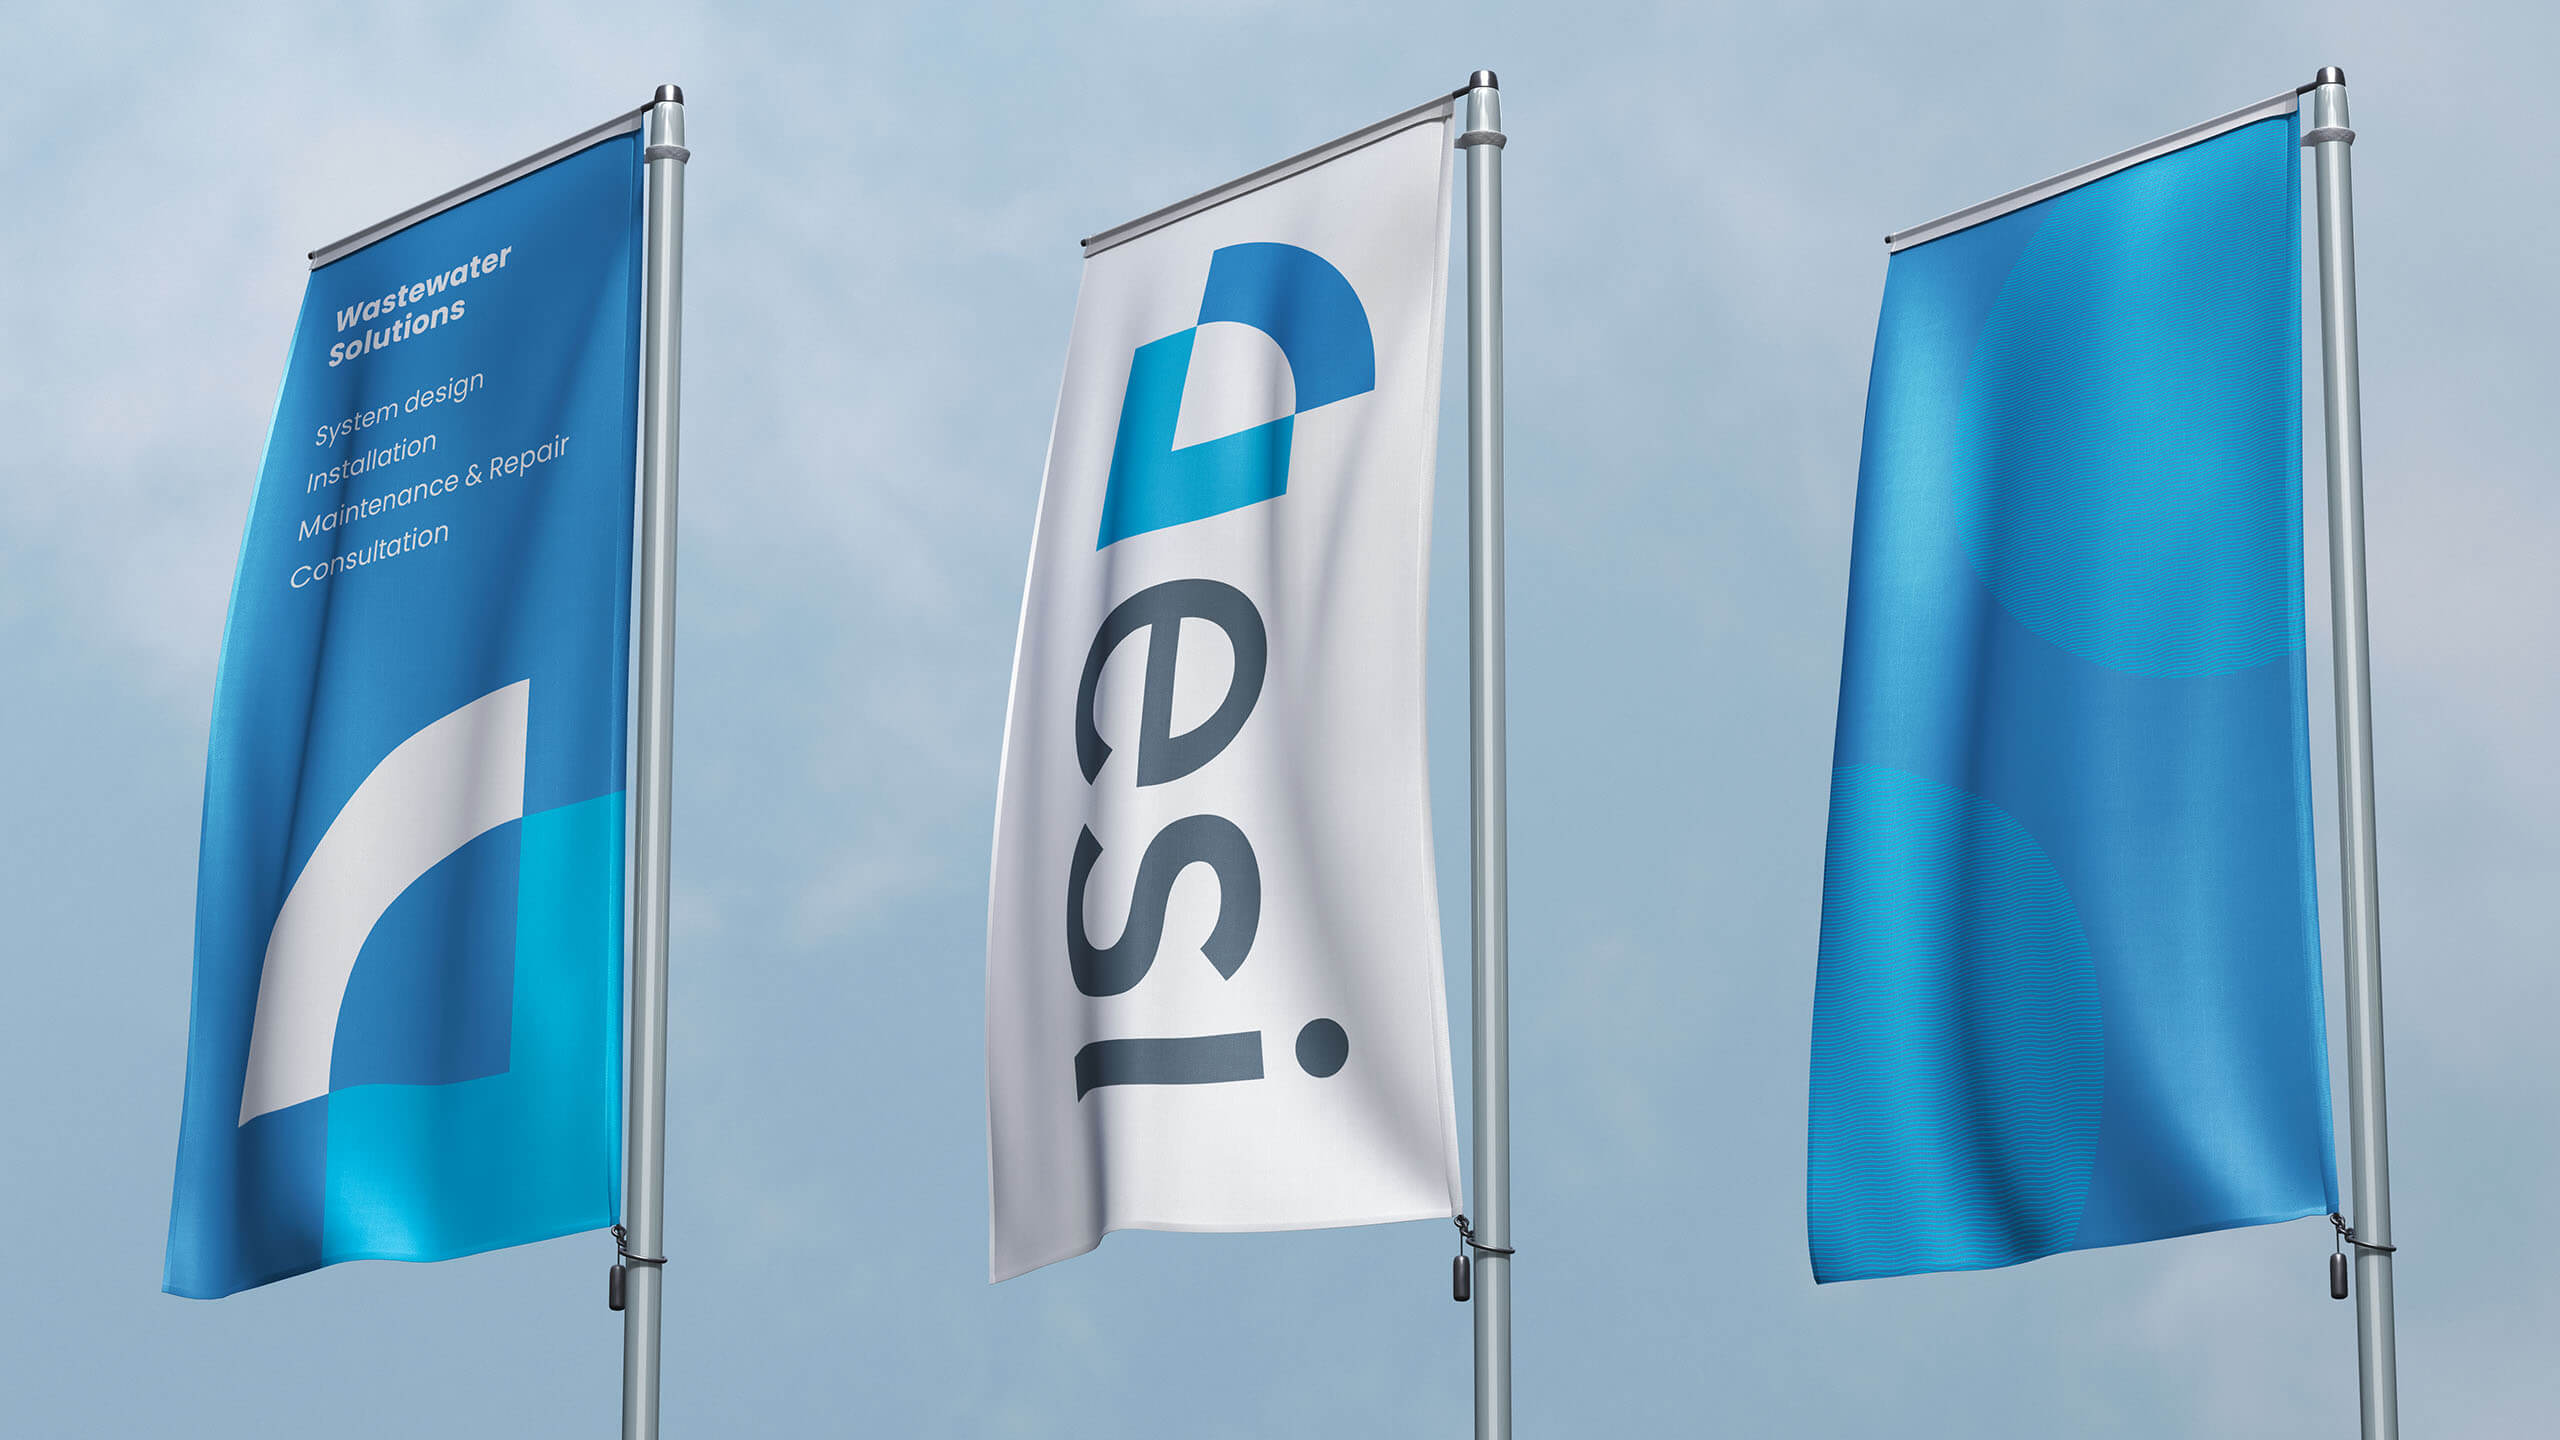 ESI Group flag banners design by The Coopers